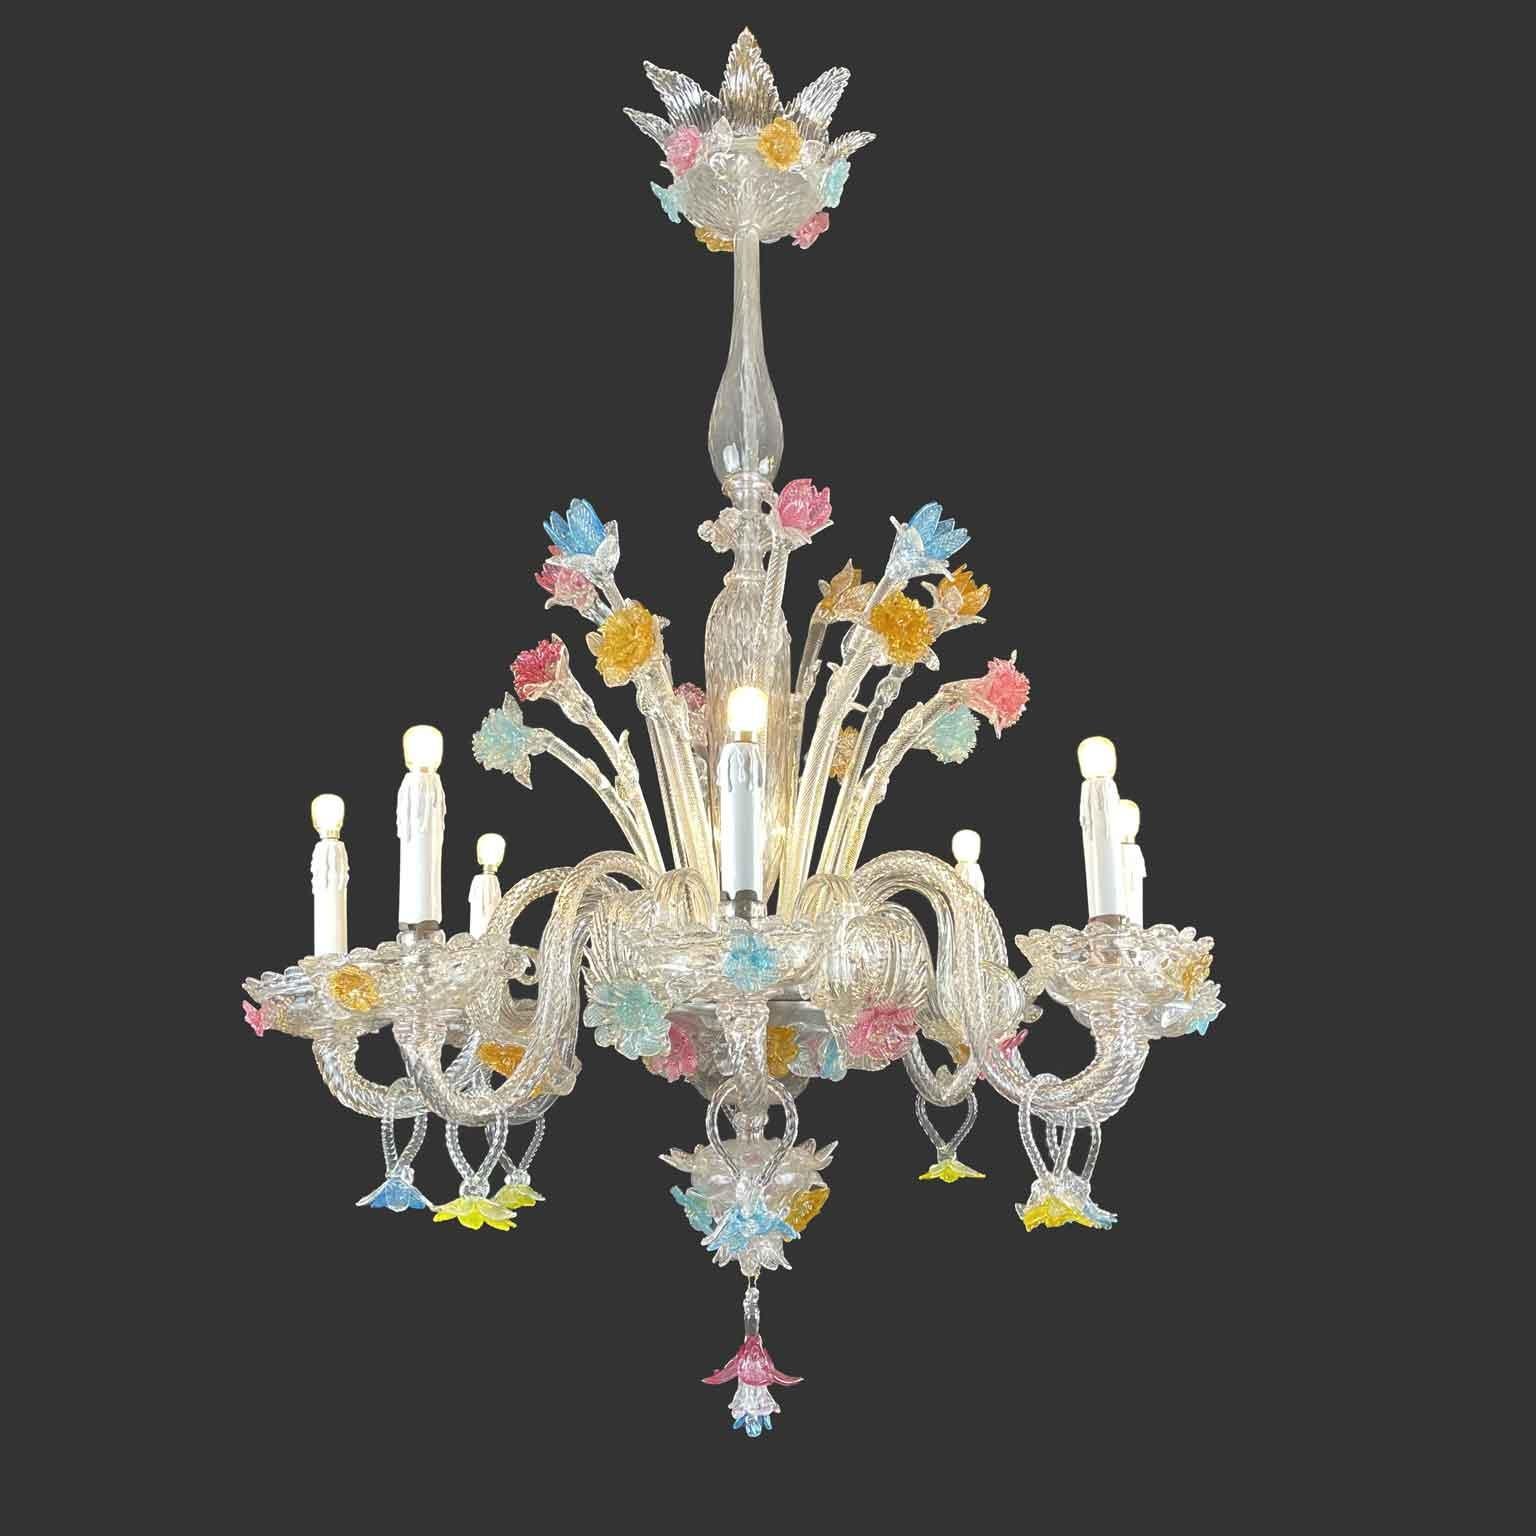 A timeless Venetian blown clear chandelier with pink, blue and yellow details, a Murano circular chandelier, elegant structure finely decorated with eight curved arms ending with upwards corolla shaped bobeiges. Rose, yellow and blue floral elements